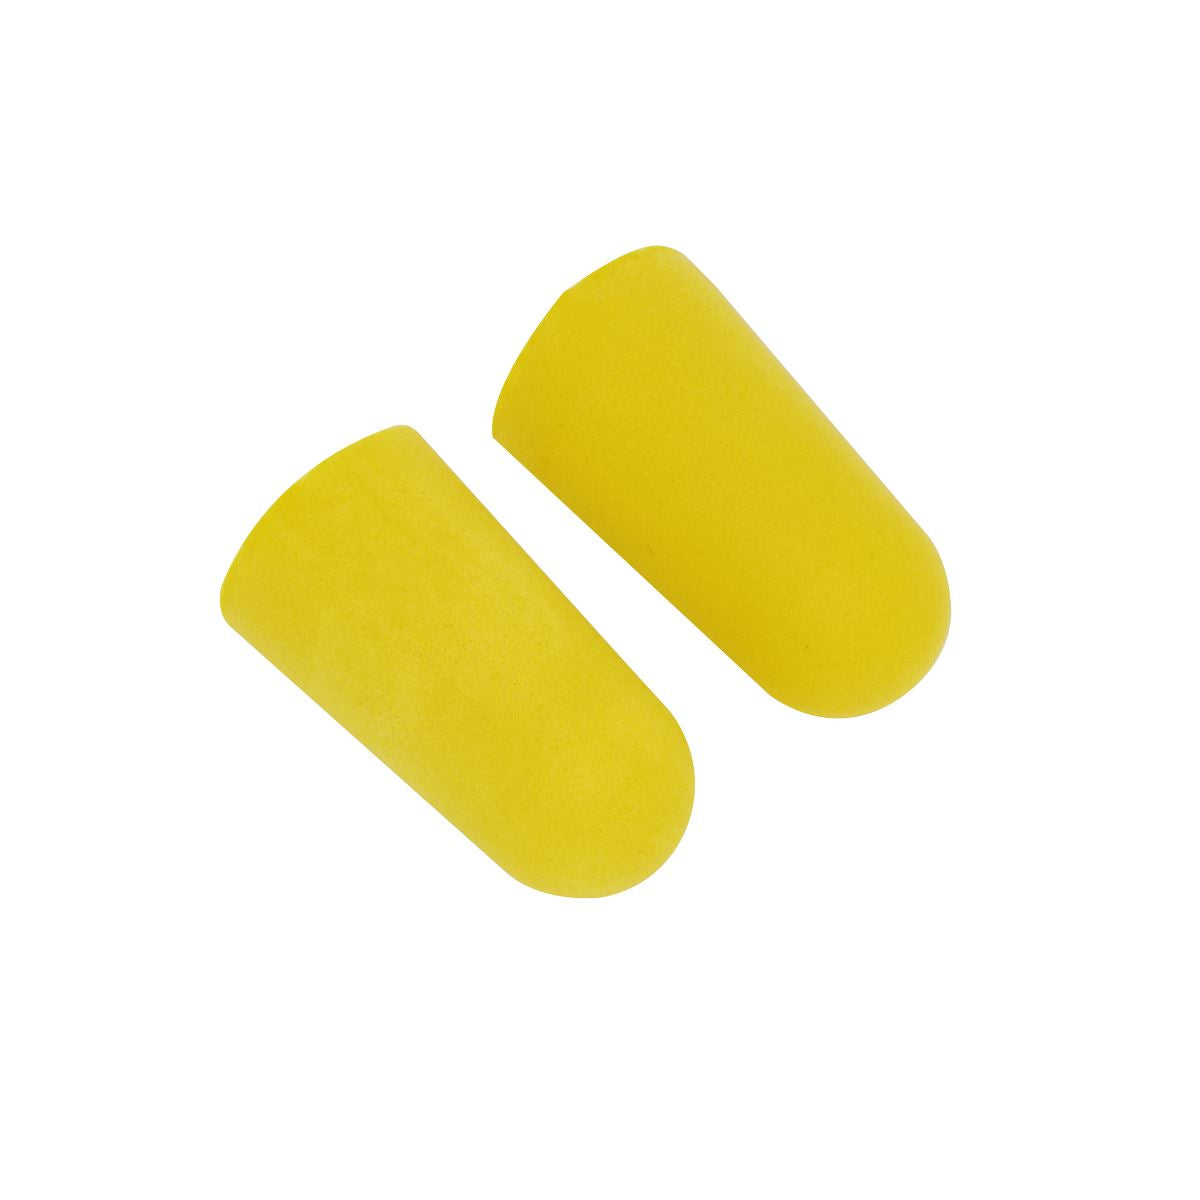 Worksafe by Sealey Ear Plugs Dispenser Refill Disposable - 250 Pairs